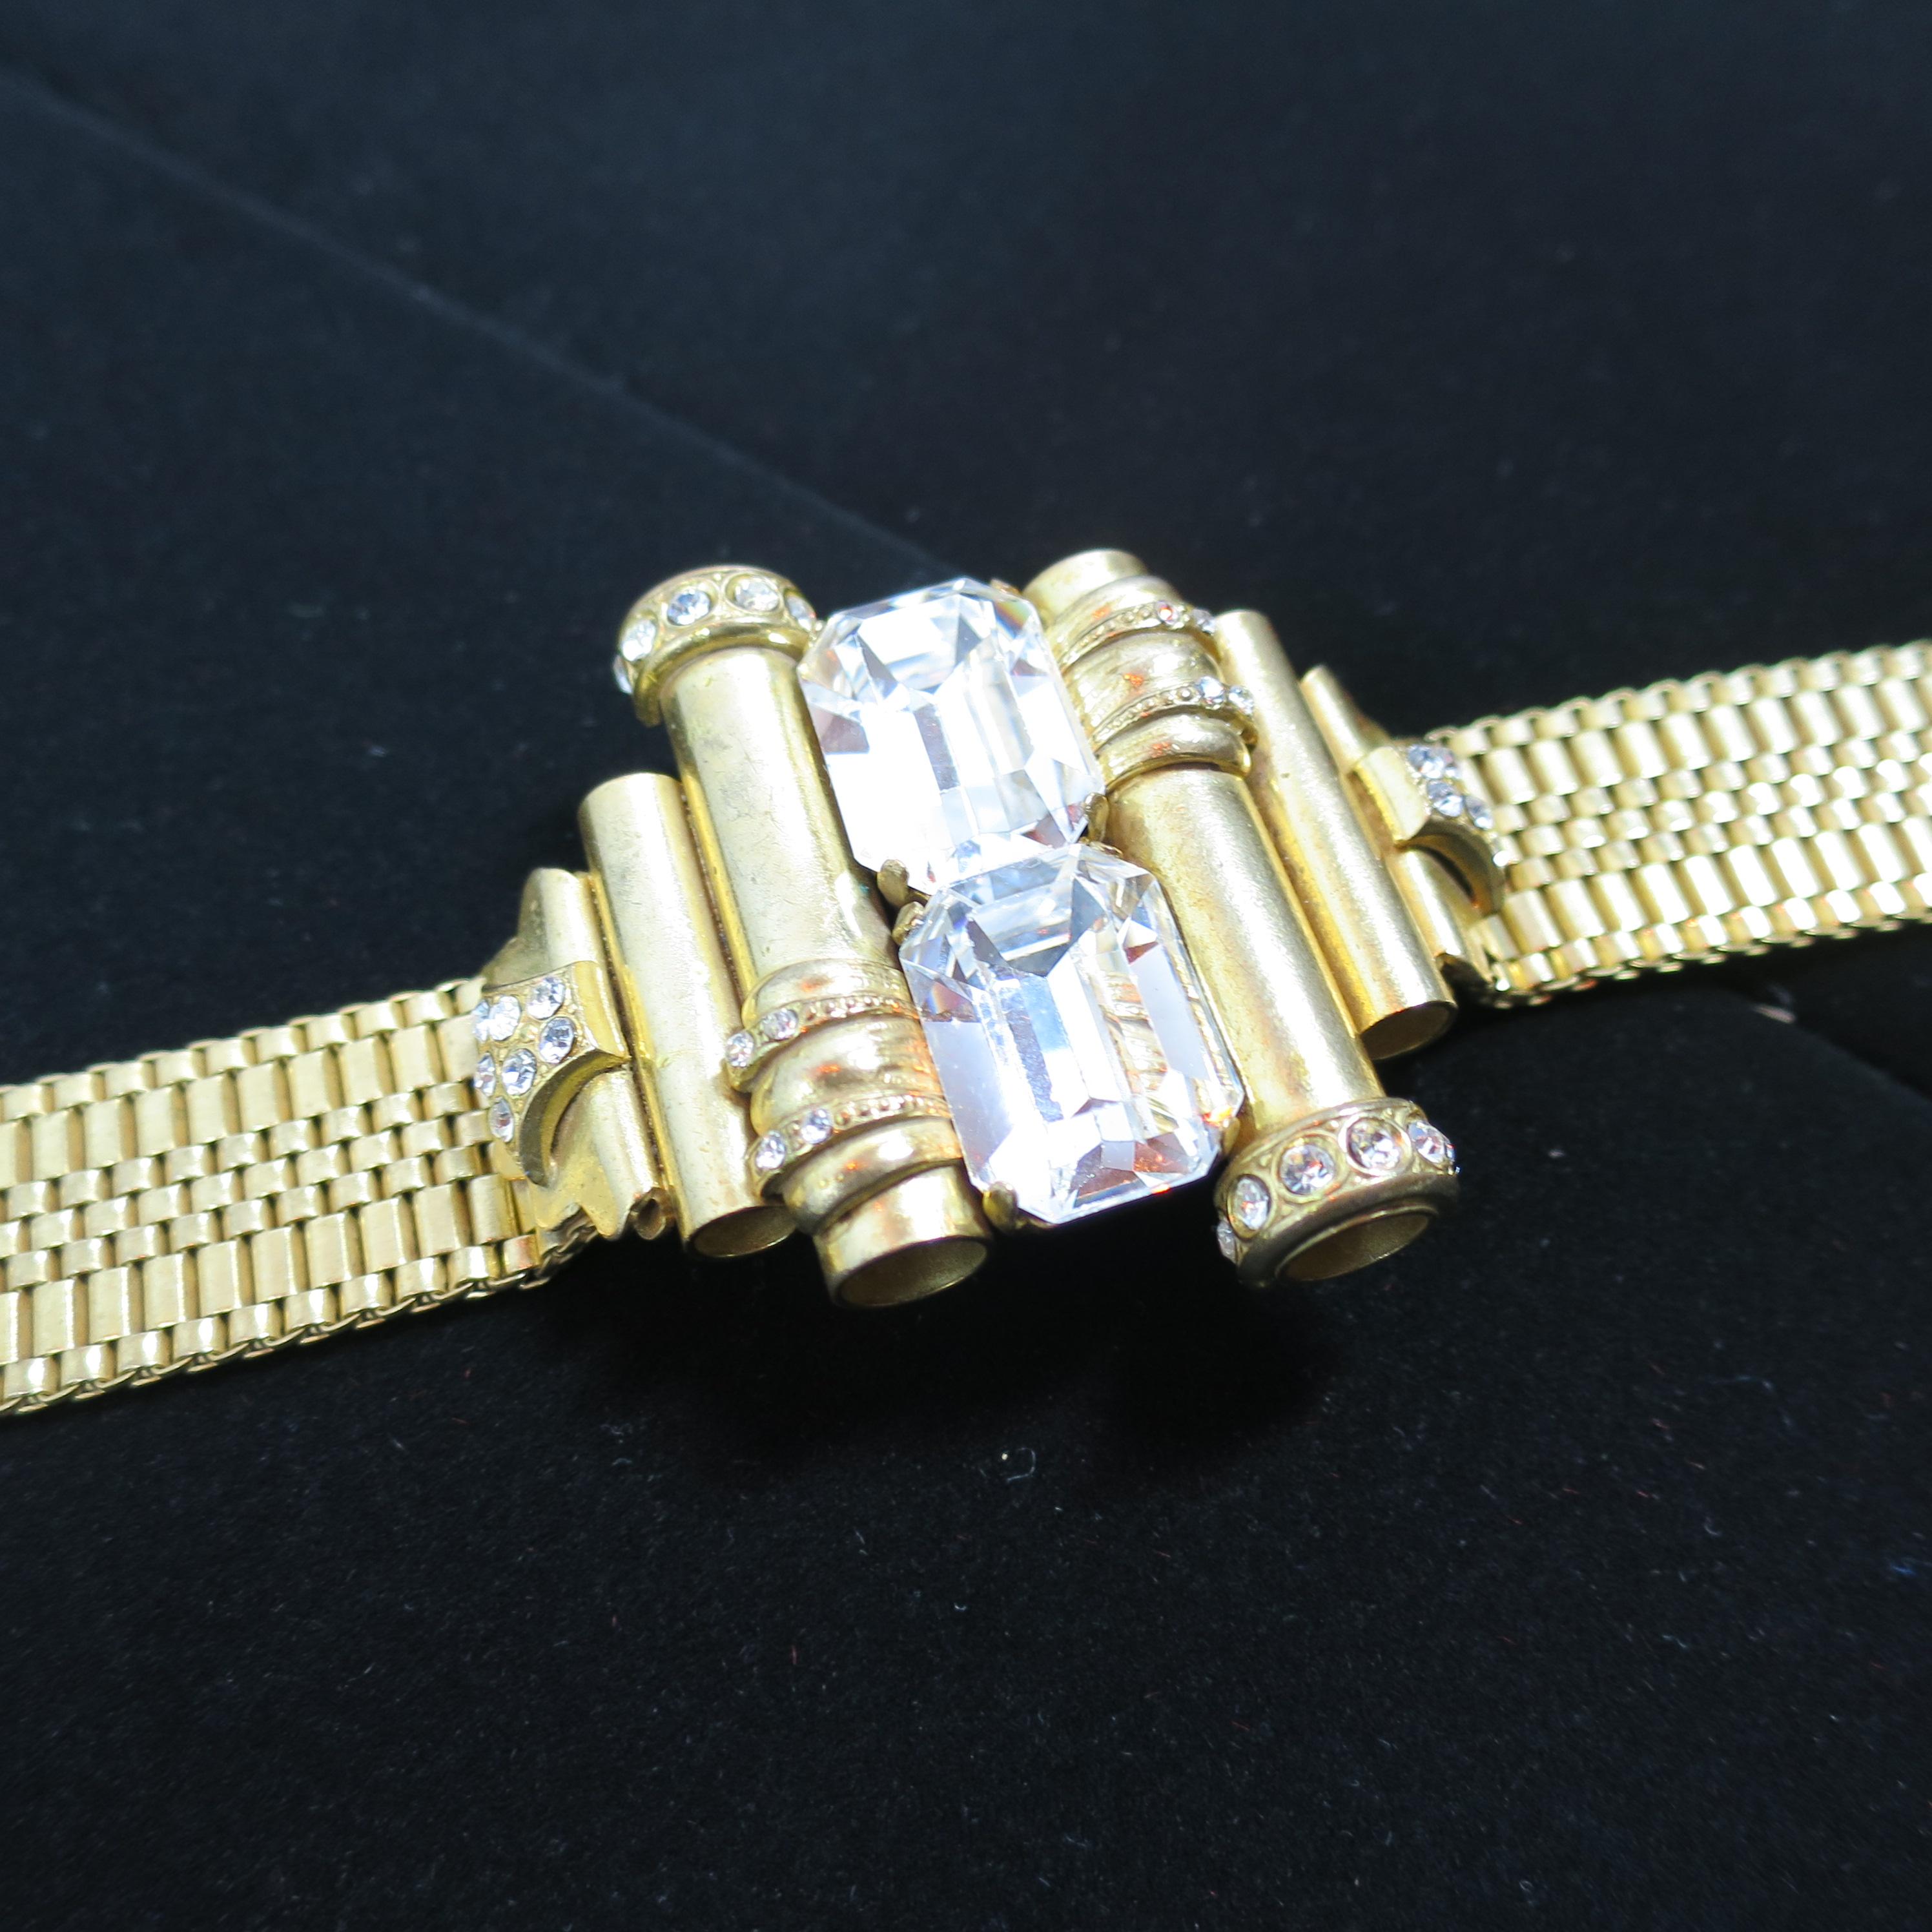 Offered here is a Mid-Century architectural woven-link gold-plated bracelet from the 1940s. The massive centerpiece is slightly curved, and comprised of hollow tubes embellished with pave-set clear crystals; the structural design is a double mirror